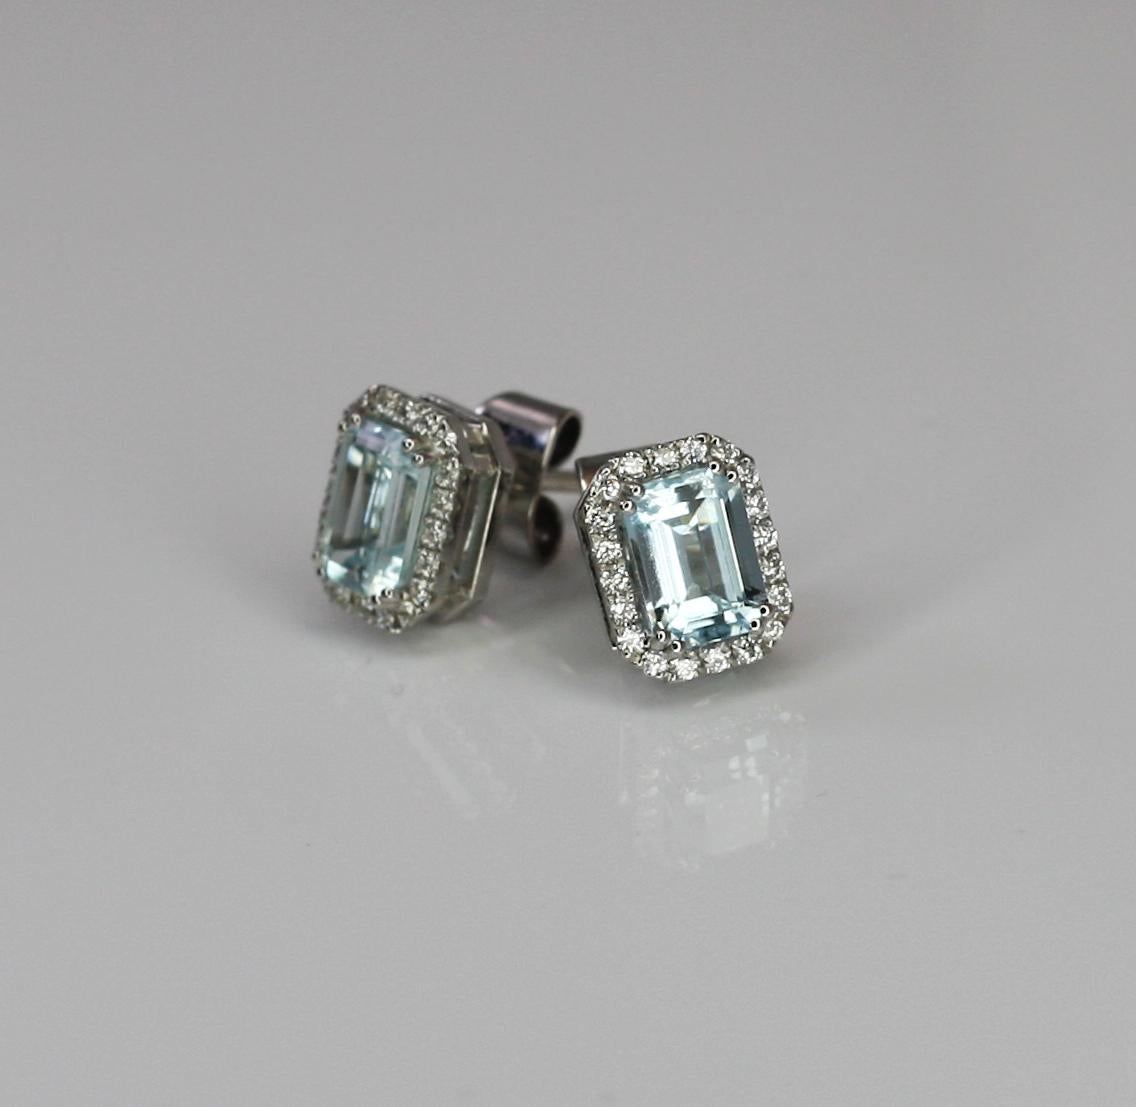 These S.Georgios square earrings are 18 Karat white gold and all handmade. The stunning pair is decorated with Brilliant cut Diamonds, a total weight of 0.26 Carat and Emerald cut Aquamarines in the center a total weight of 1.80 Carat. 
These